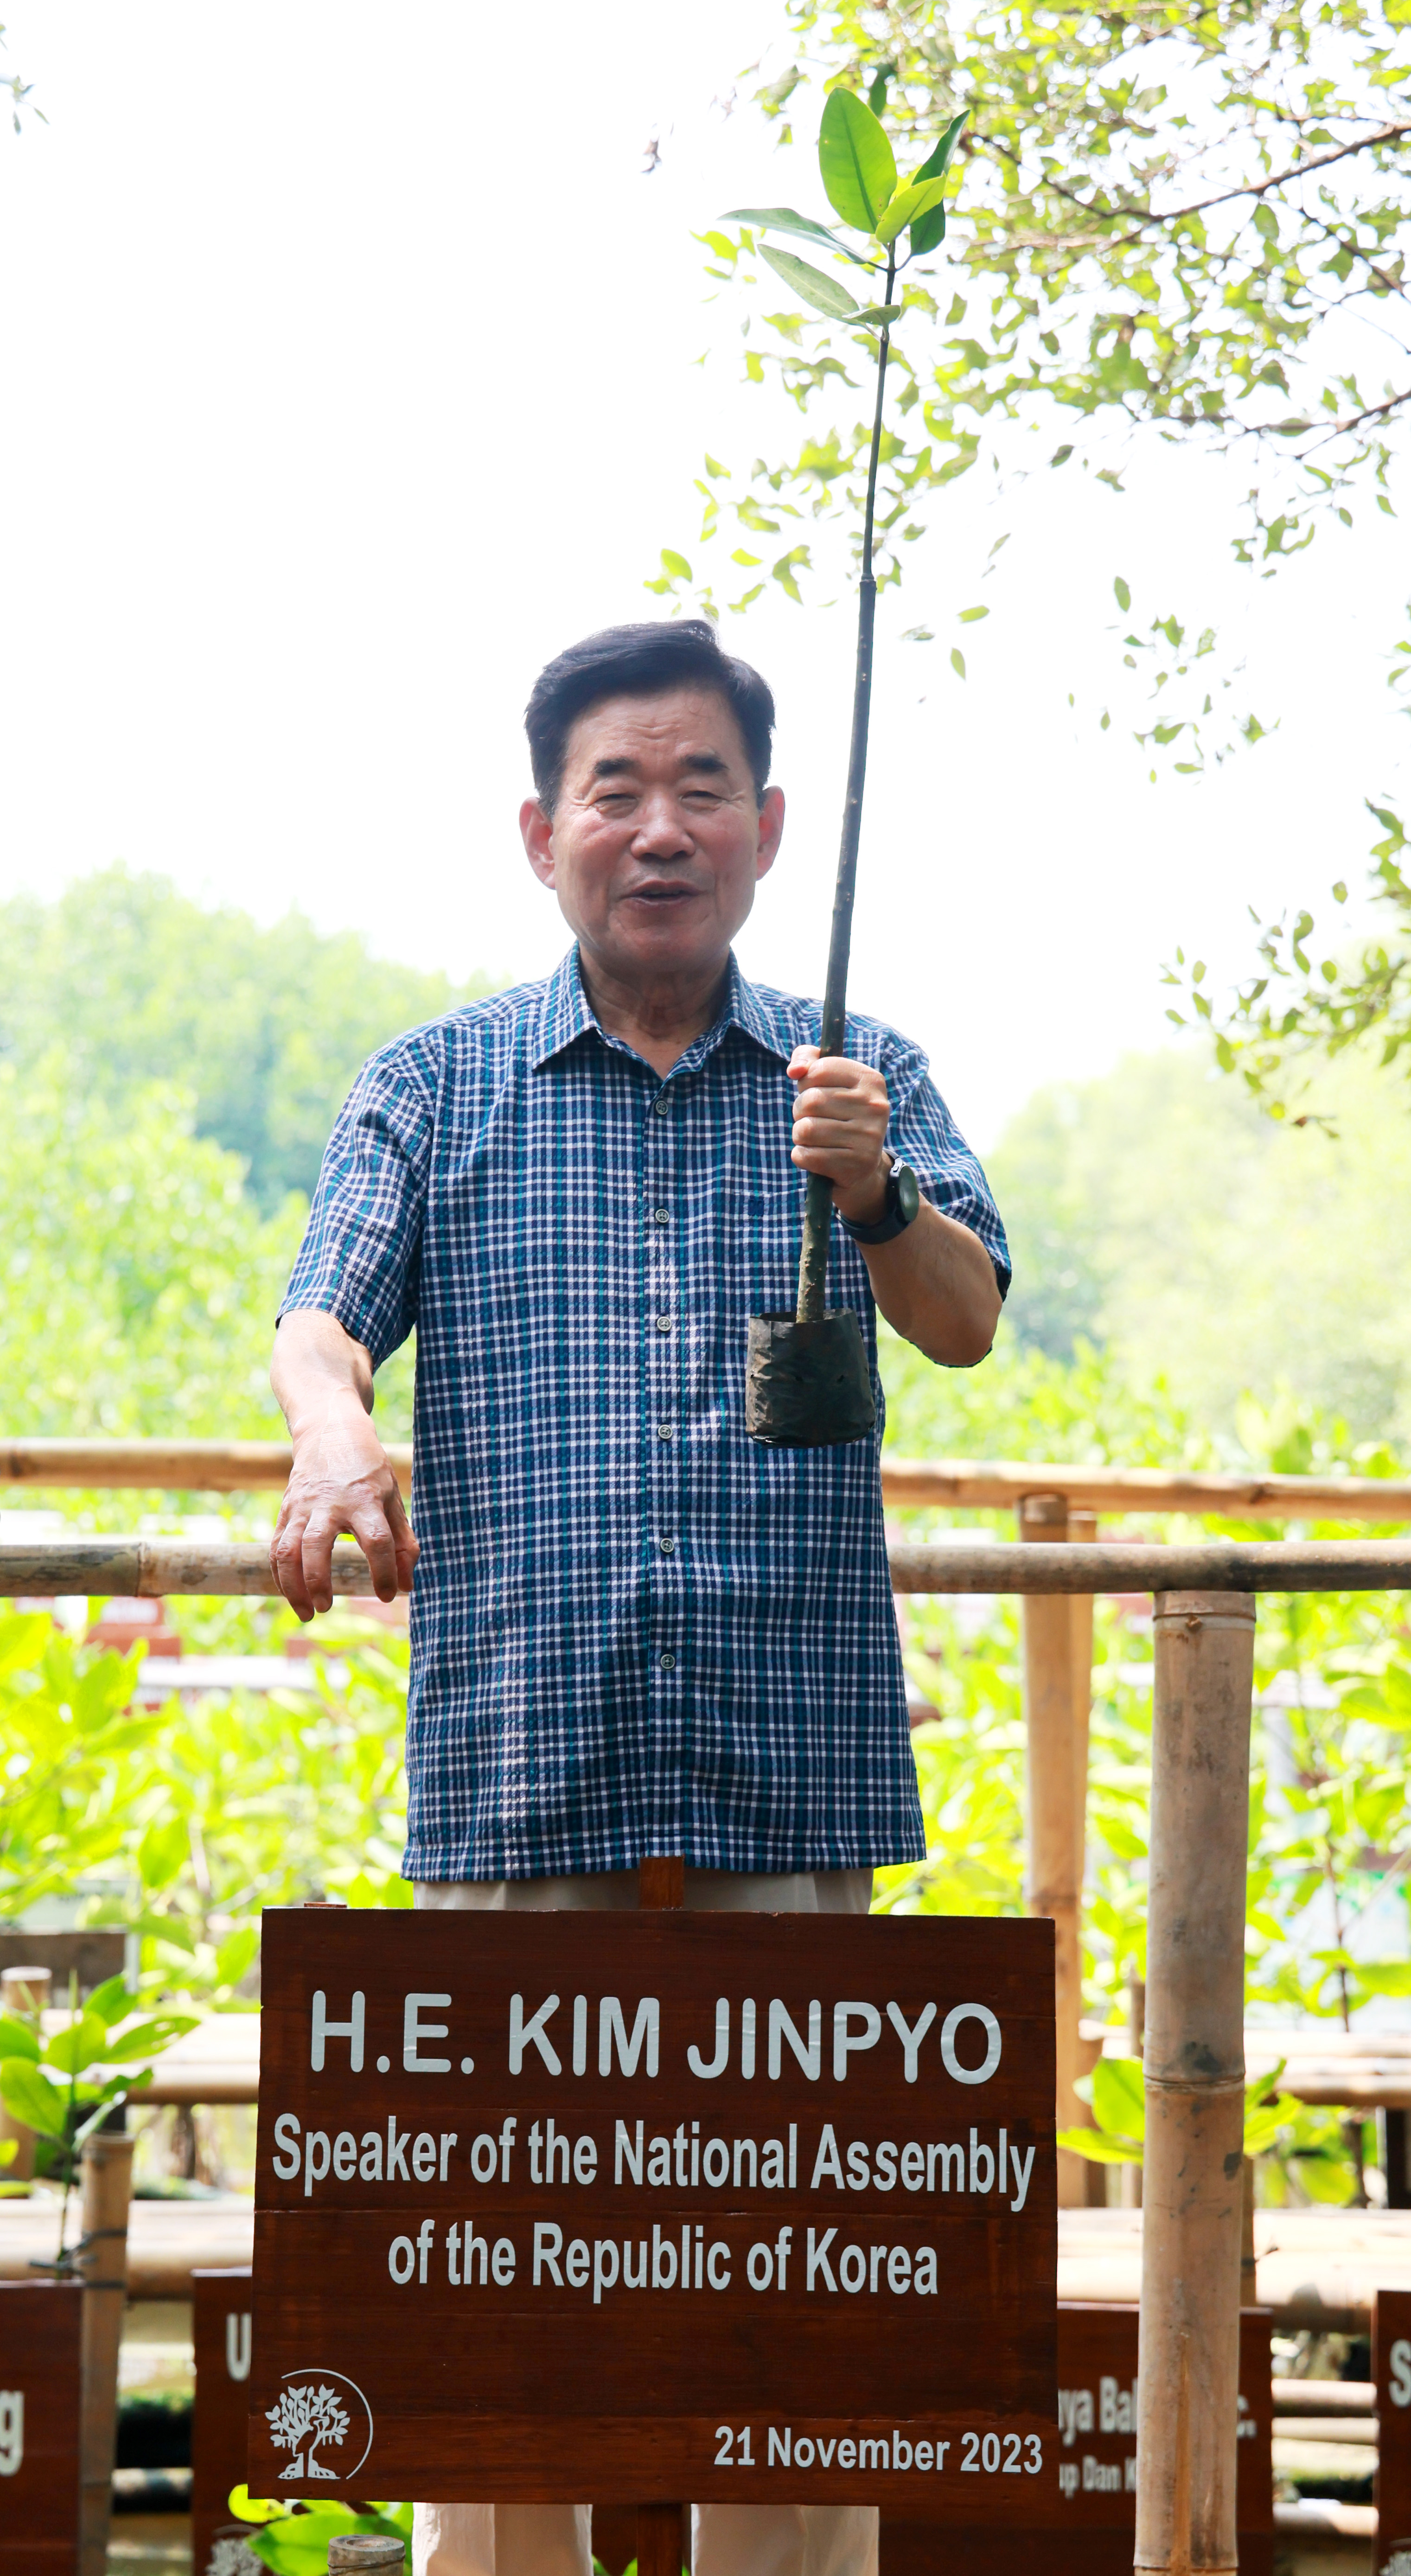 Speaker Kim Jin-pyo joins commemorative tree planting in Indonesian mangrove forest 관련사진 2 보기